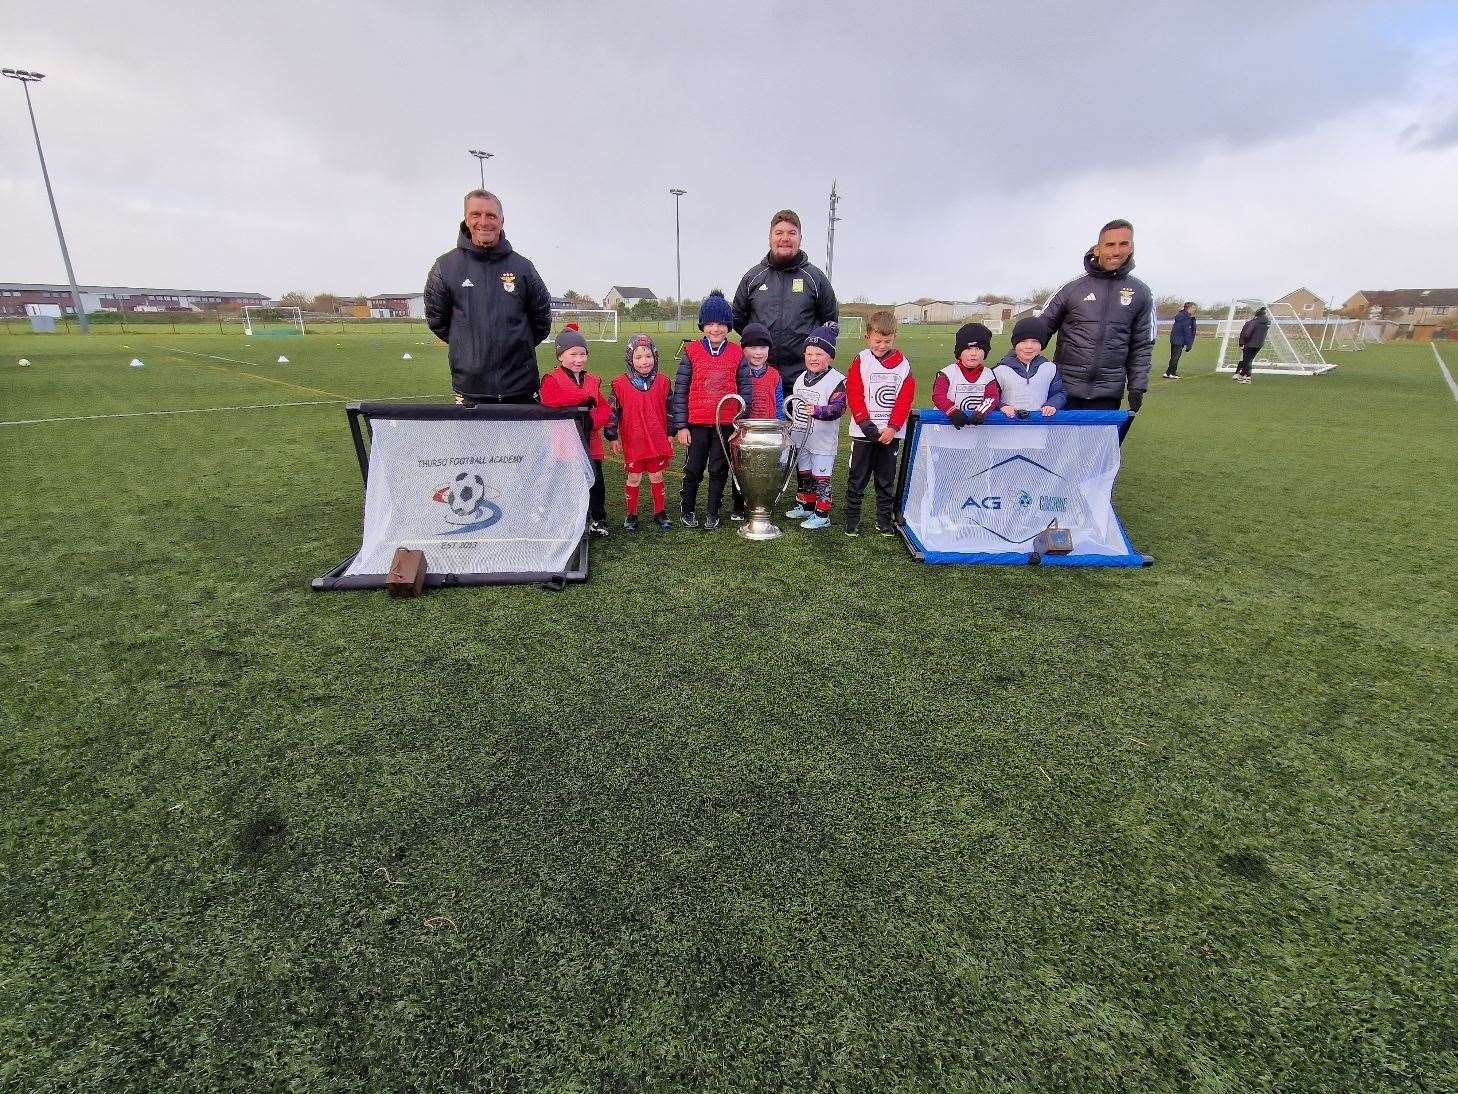 Three age groups of players under went a session with Benfica coaches Joao Rosmaniho and Serguei Kandaurov - pictured is the younger 4-6 bracket at Thurso Football Academy.